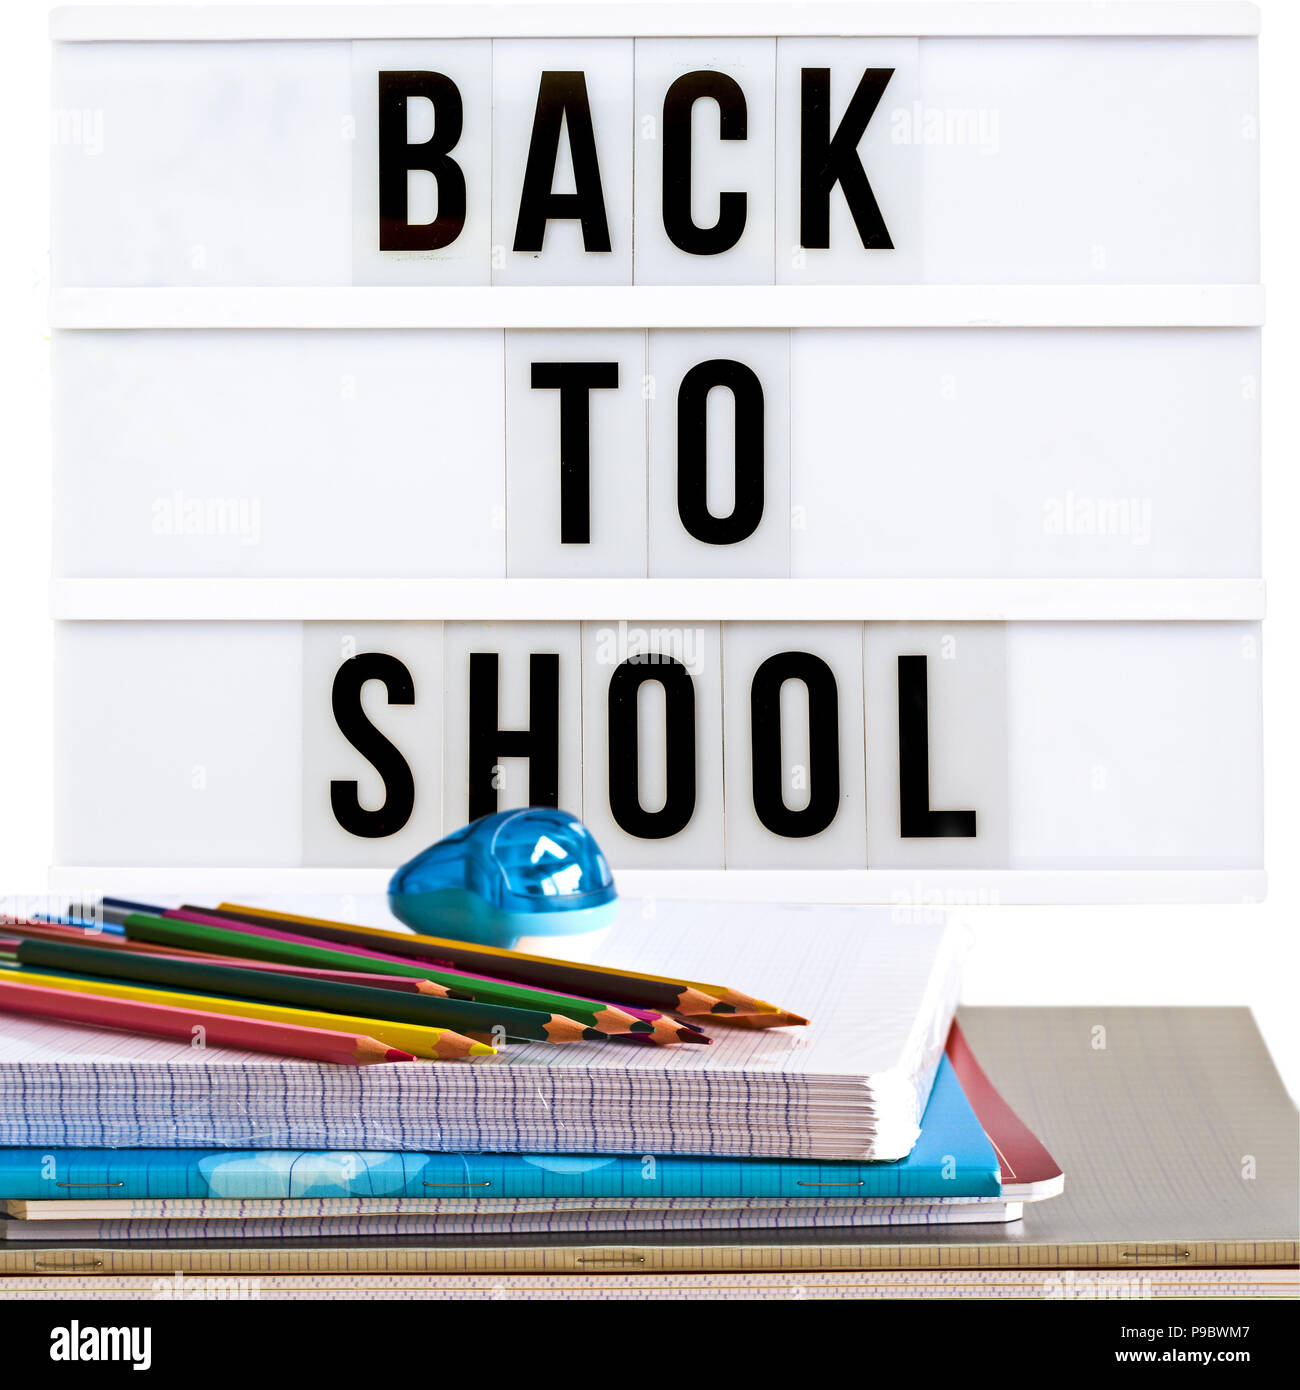 Back to school written in a light box with school supplies Stock Photo